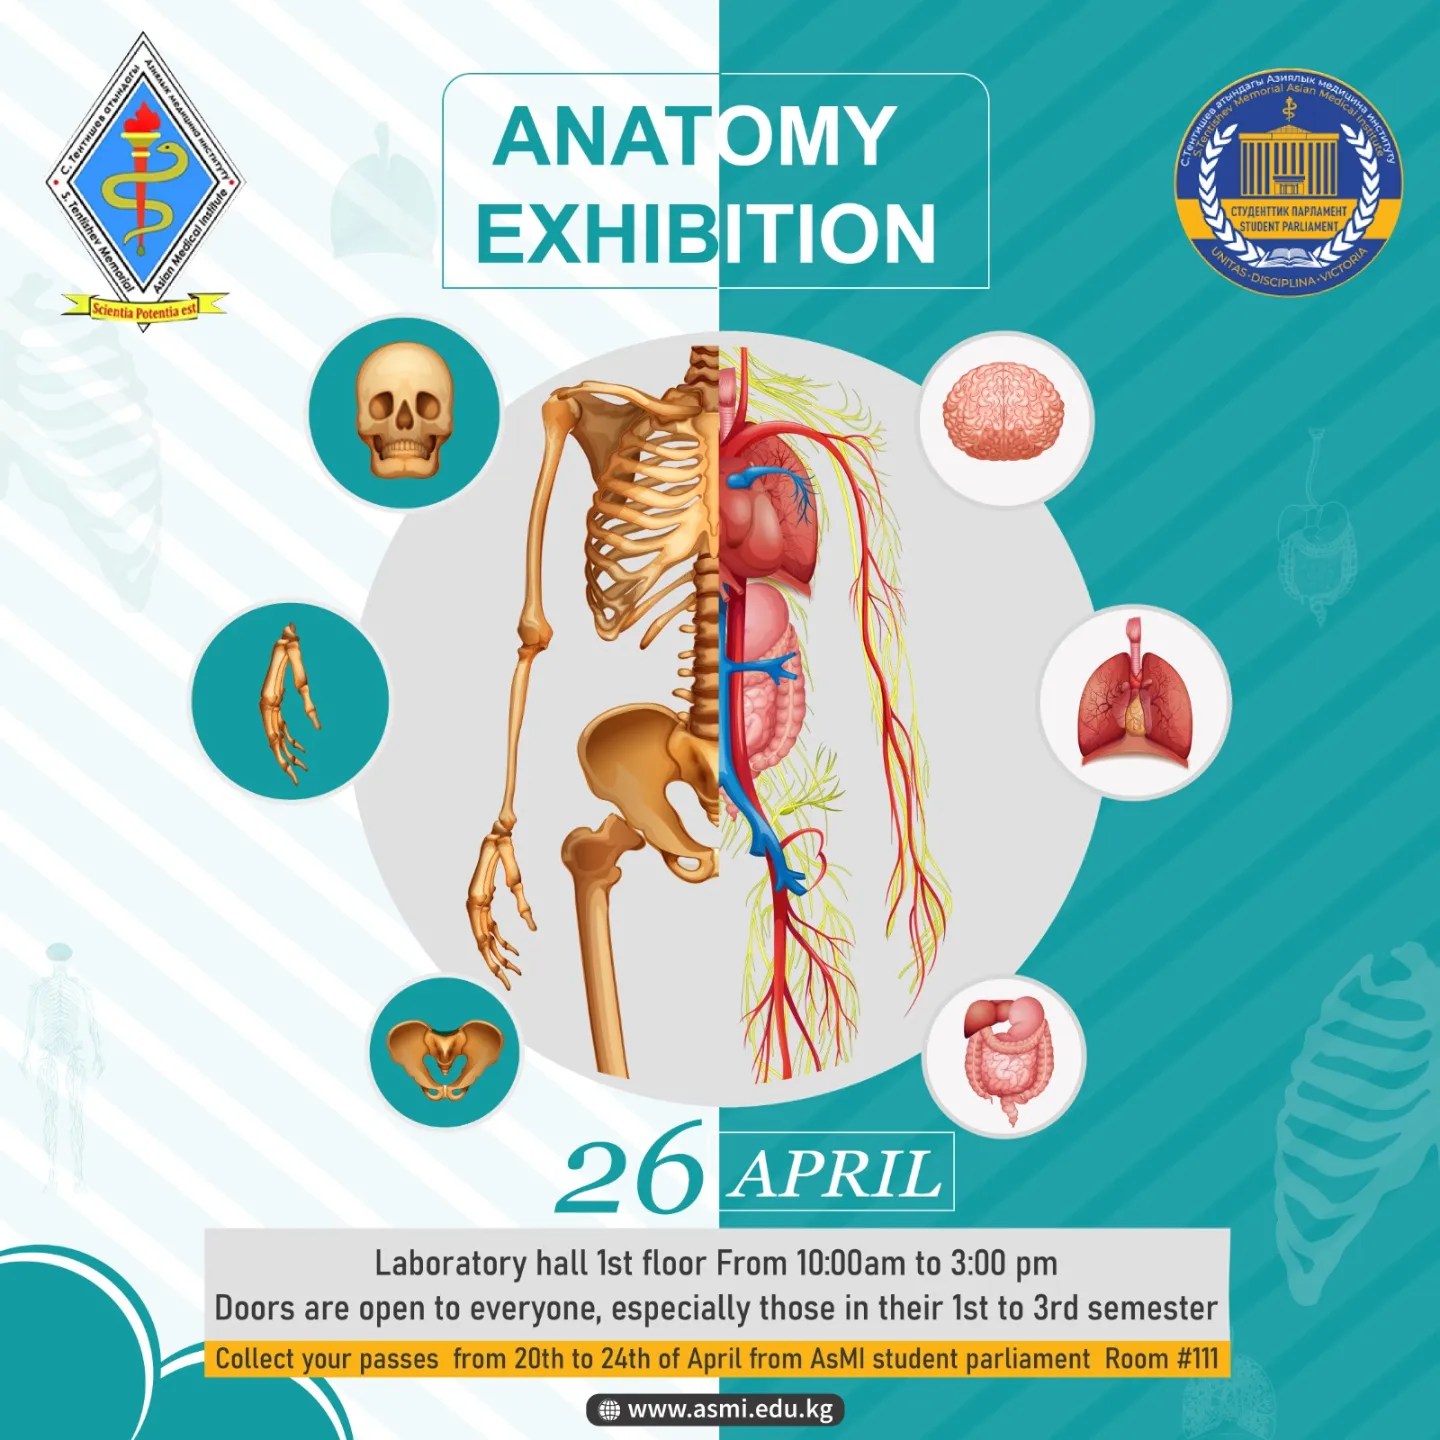 Anatomy Exhibition at Asian Medical Institute